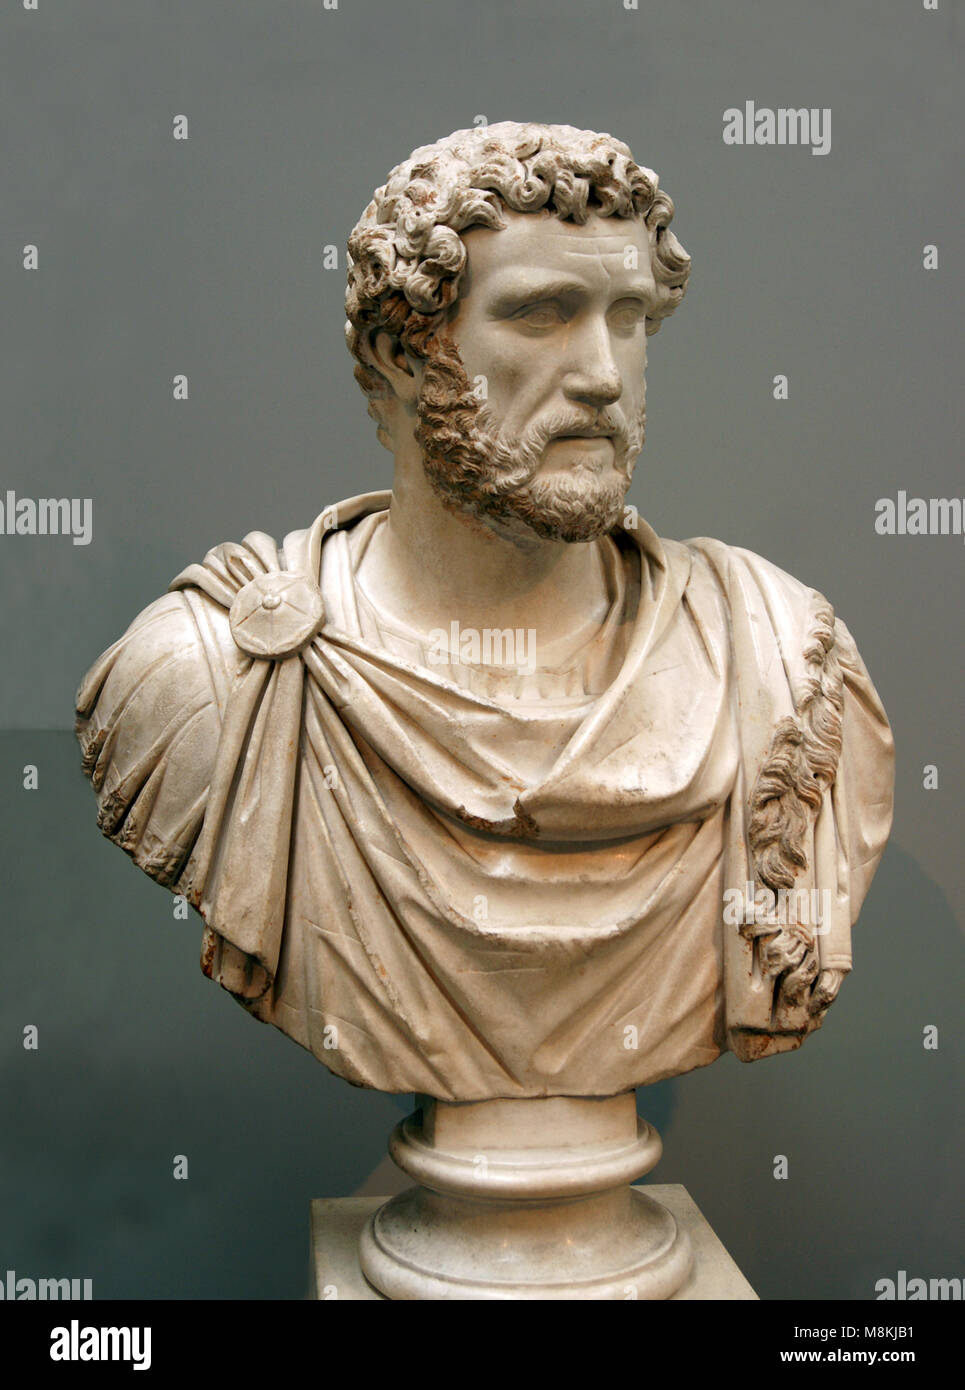 Antoninus Pius (86-161 AD). Roman emperor (138-161AD). Marble bust in military dress, about 140 AD. British Museum, London. Stock Photo